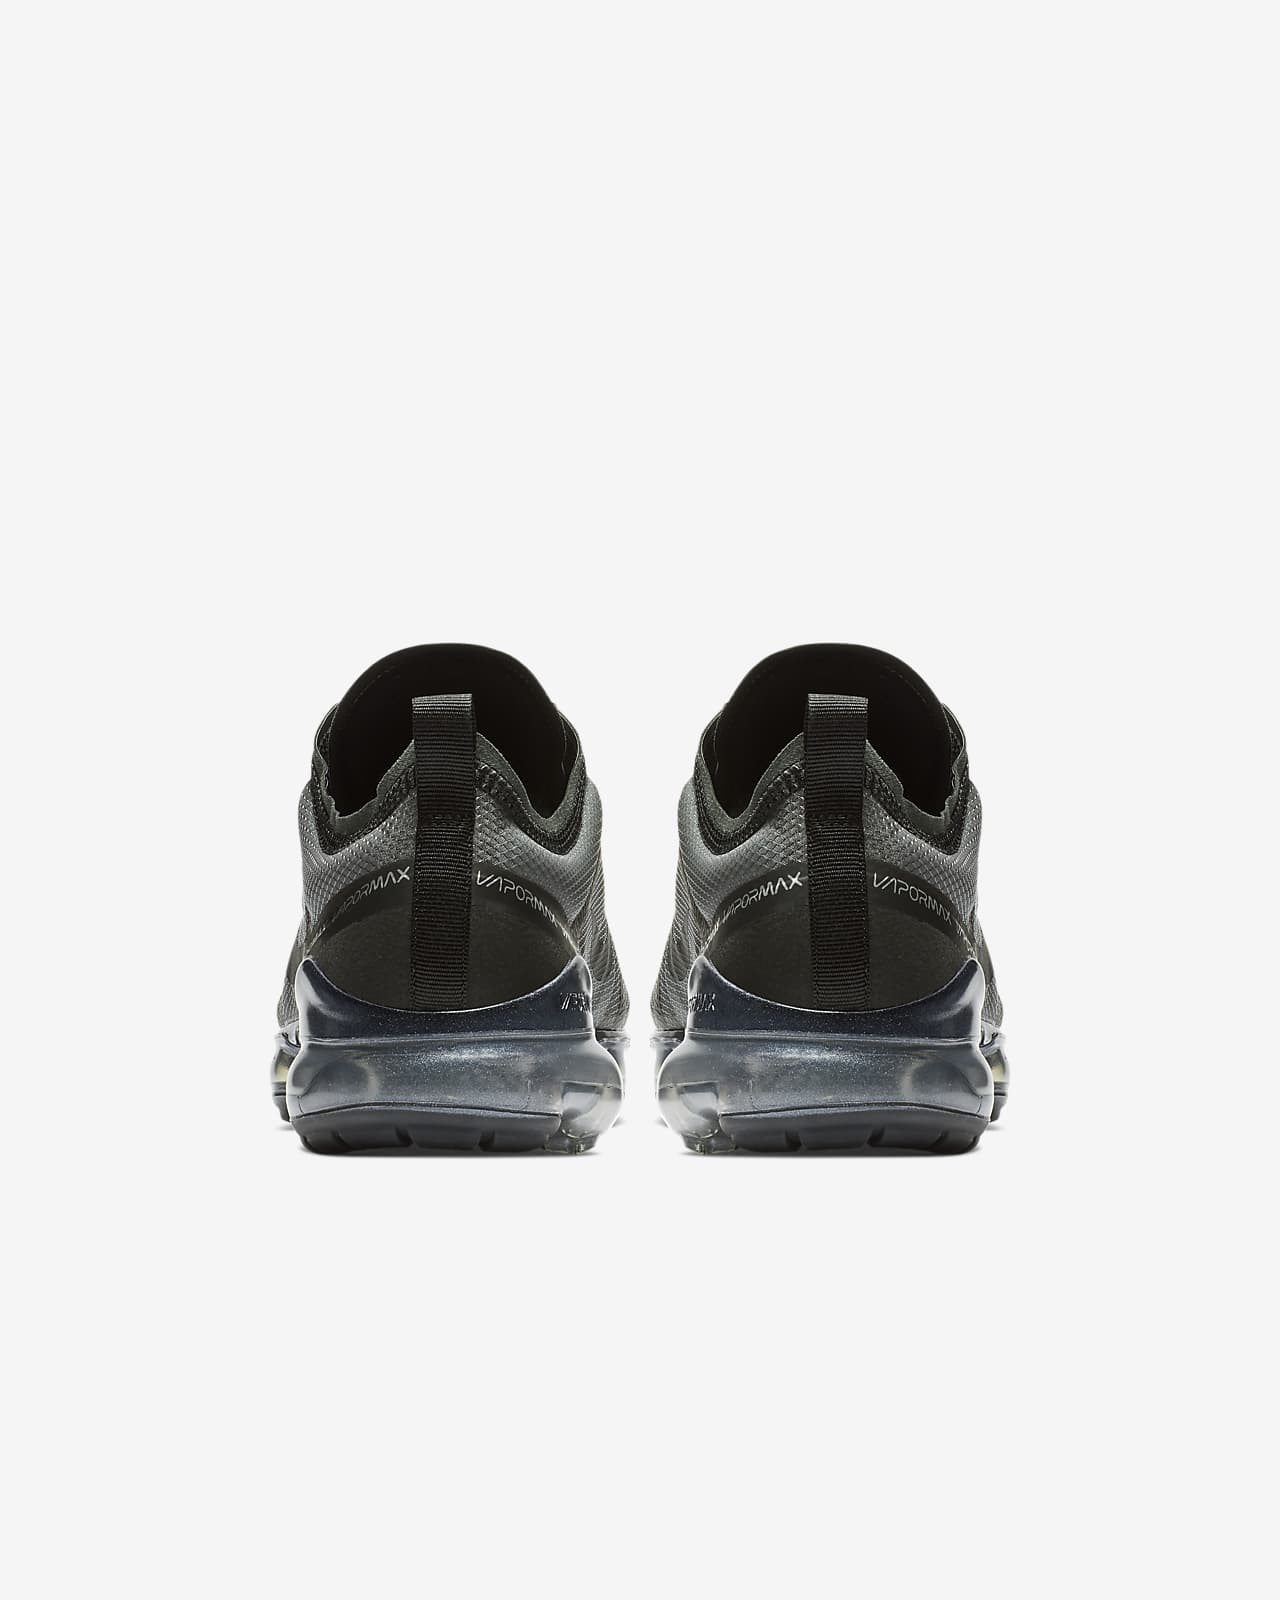 nike running vapormax 2019 trainers in black